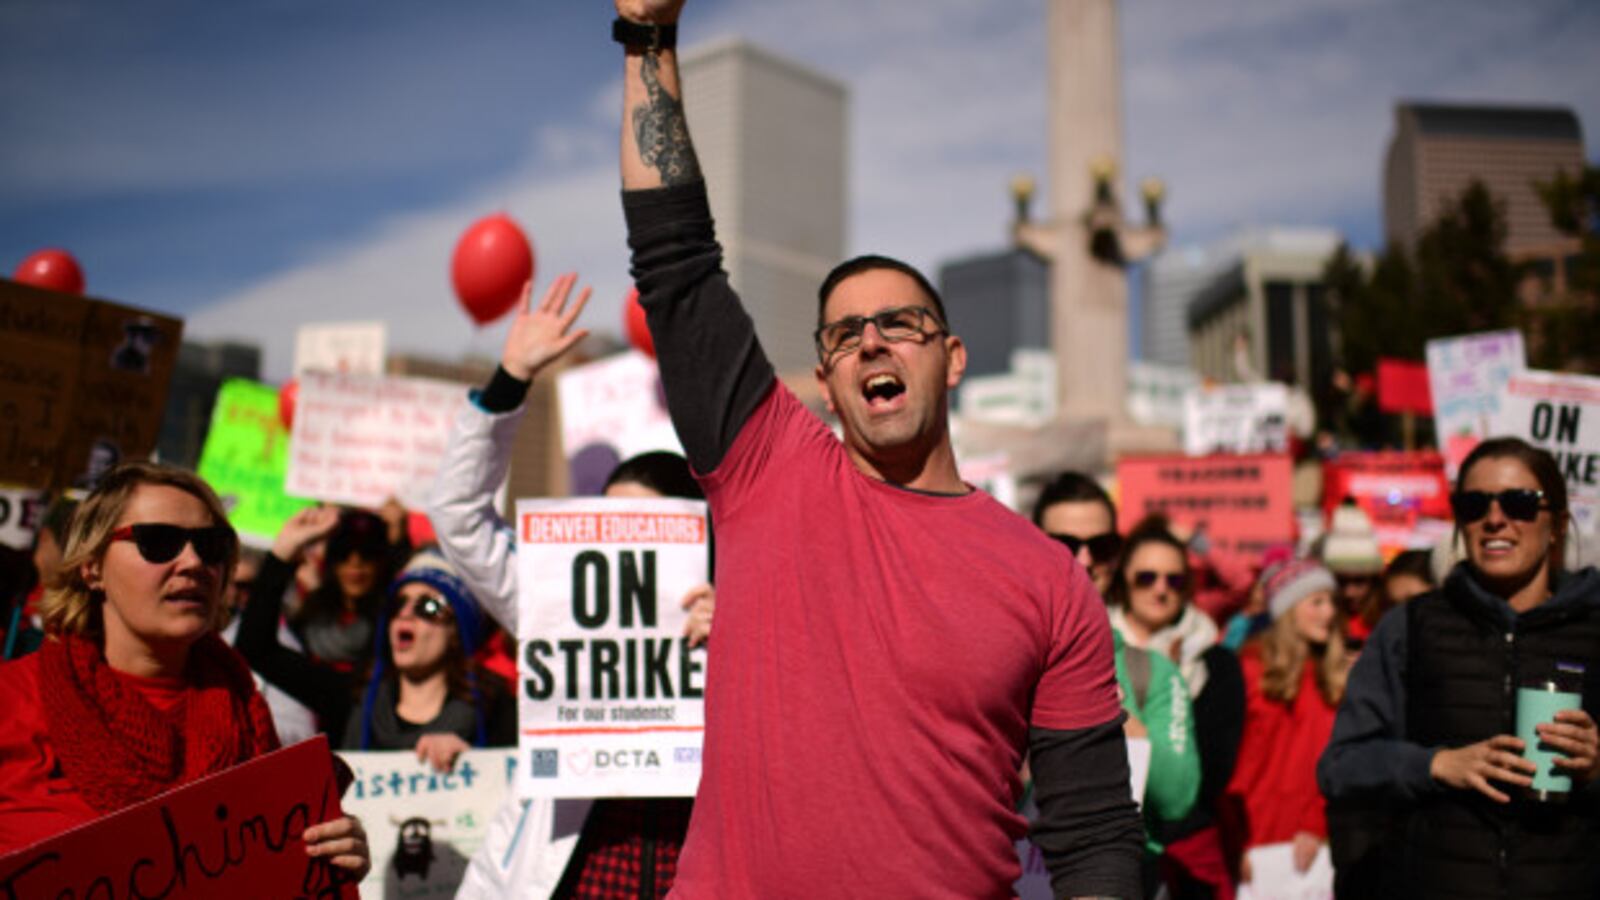 DJ Bruen, a teacher at Johnson Elementary School, gathers with other teachers and their supporters at a rally in Civic Center Park on the second day of the Denver teacher strike.